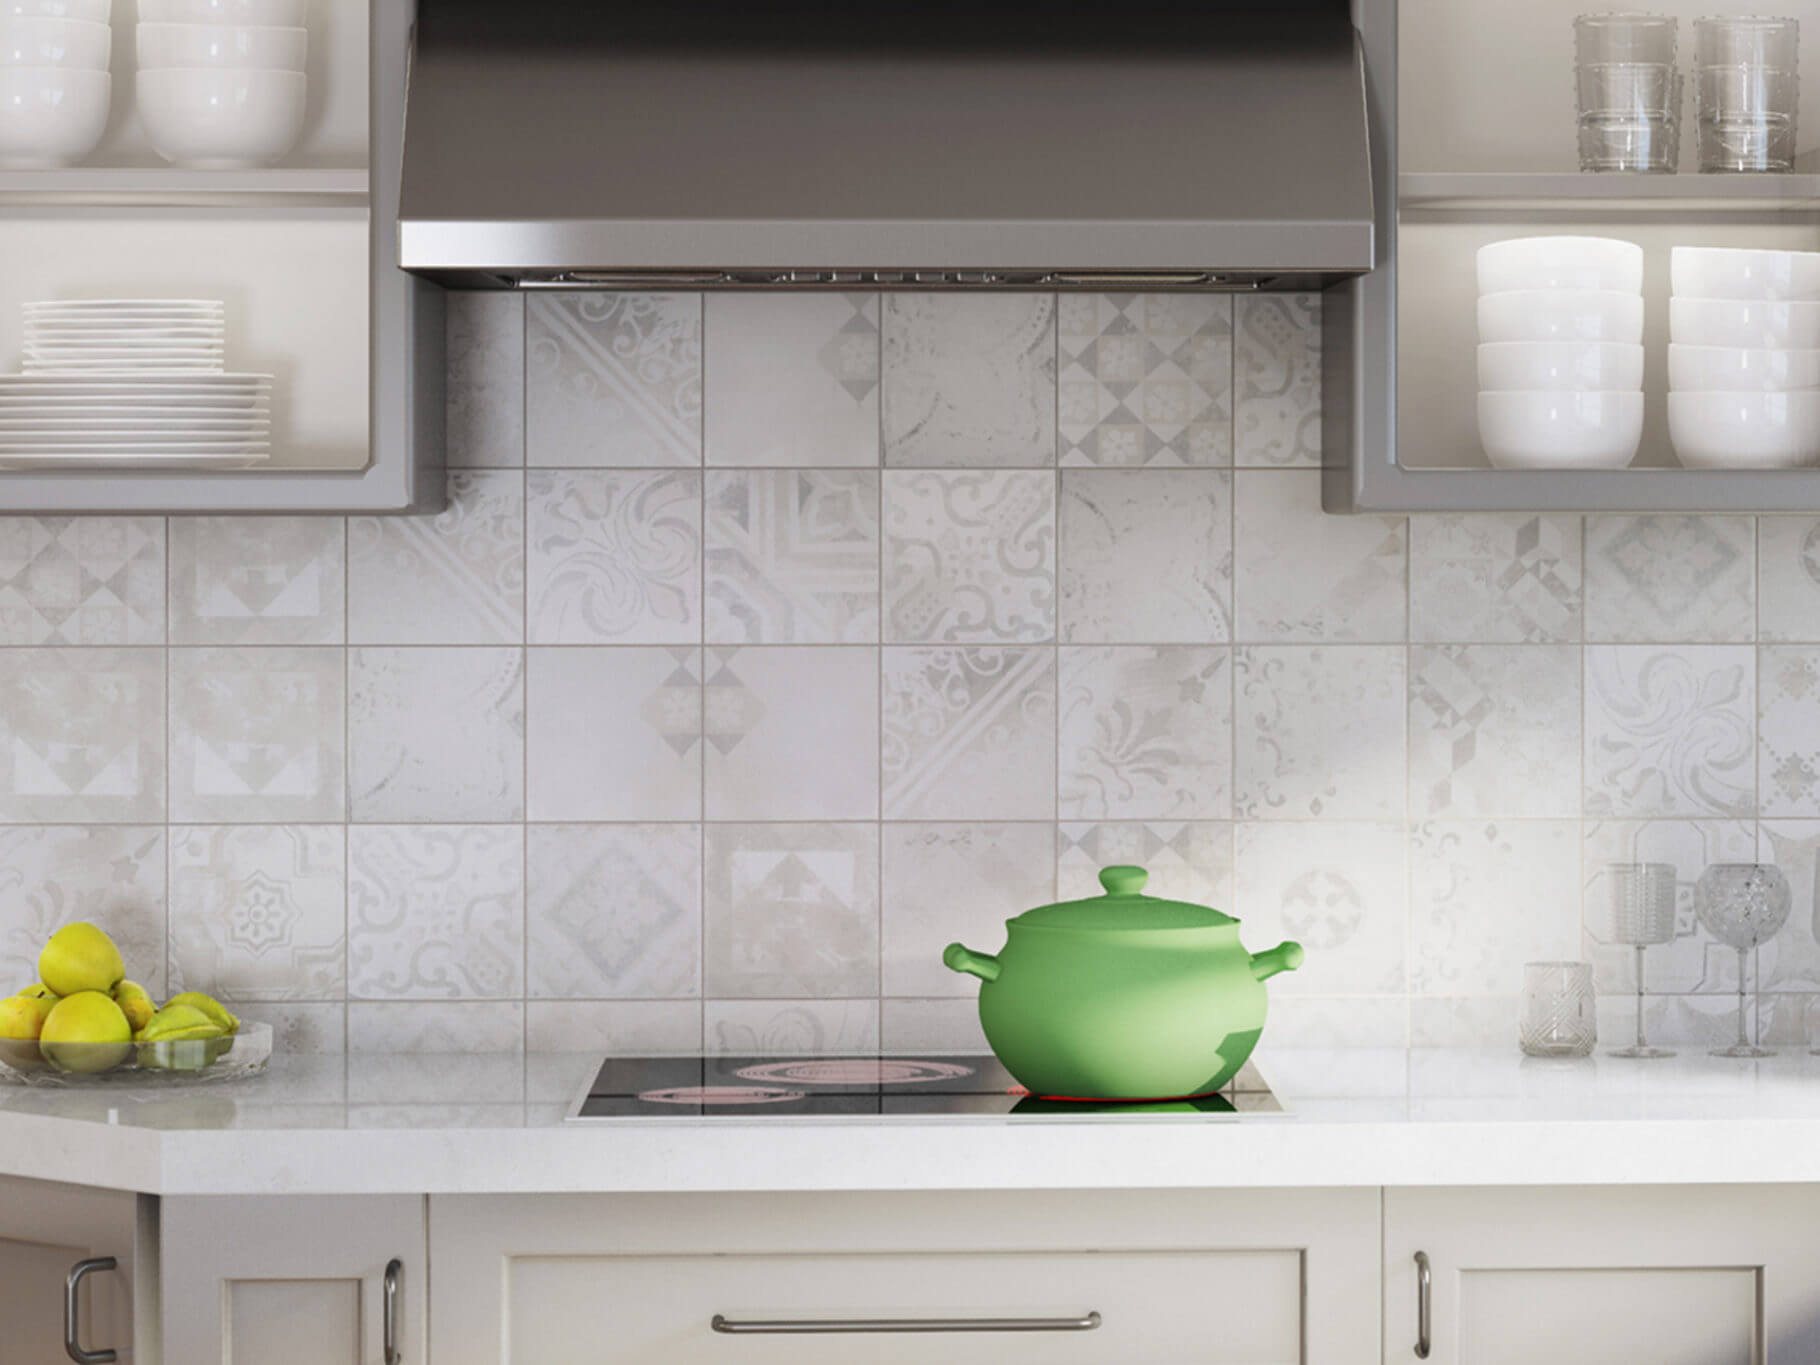 What are the Best Tiles for a Backsplash?